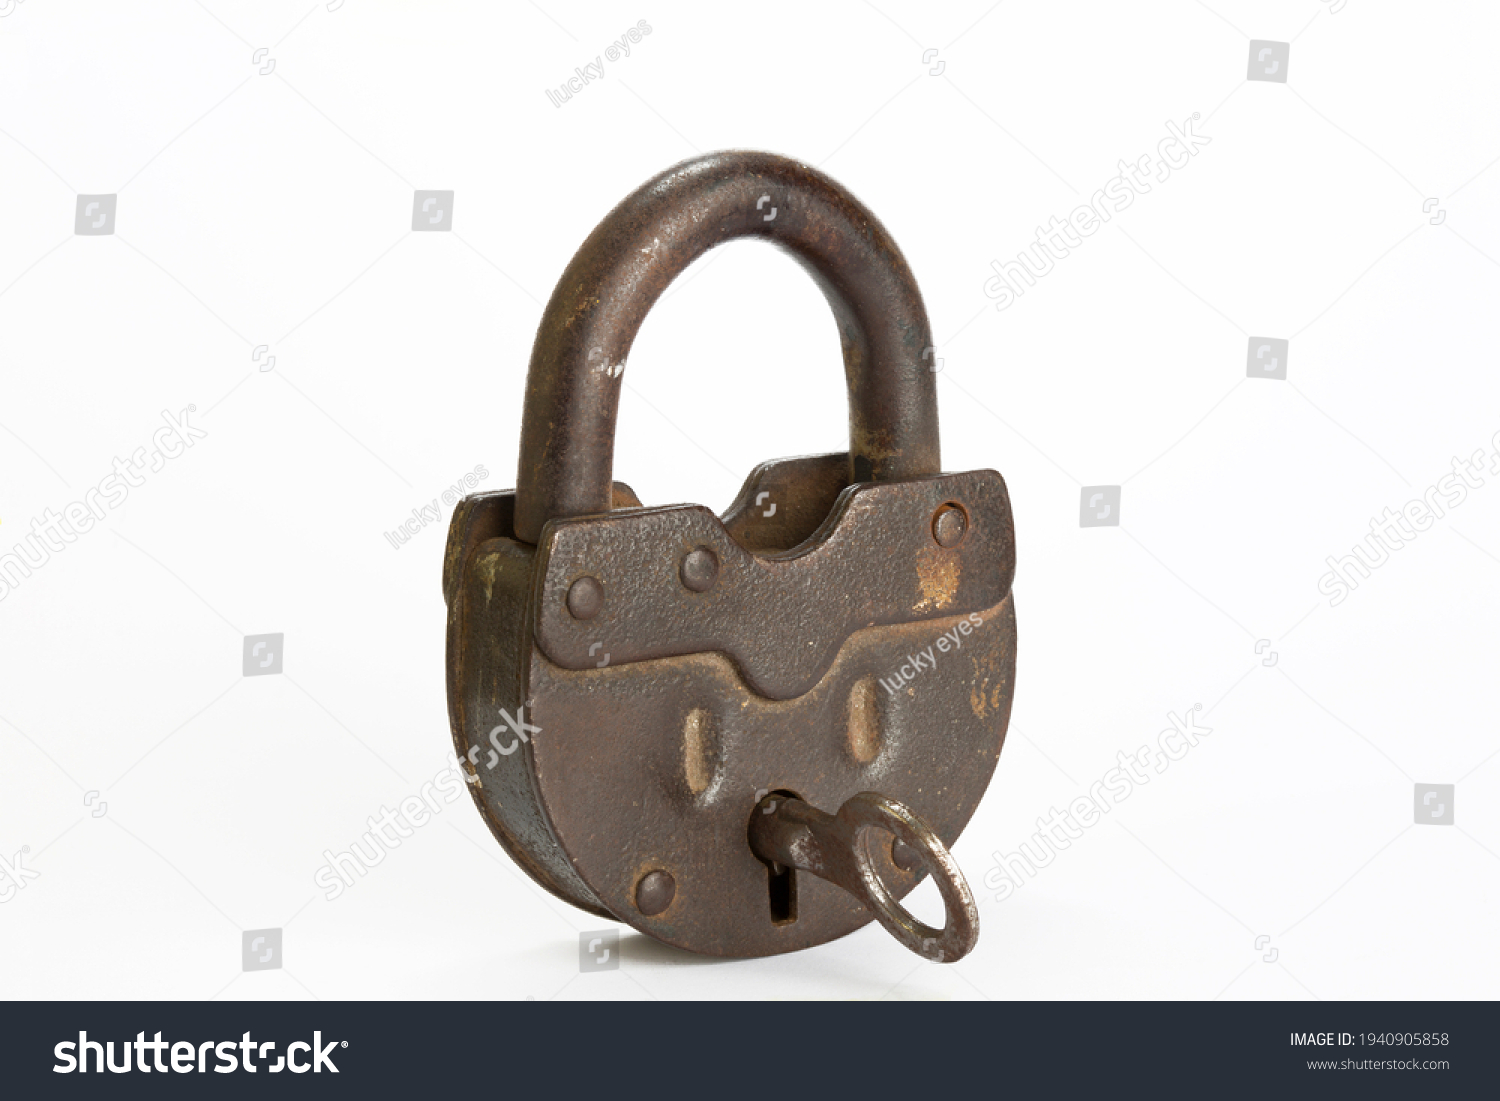 Vintage style copper lock and key isolated on white background. Antique objects. Horizontal close-up.  #1940905858